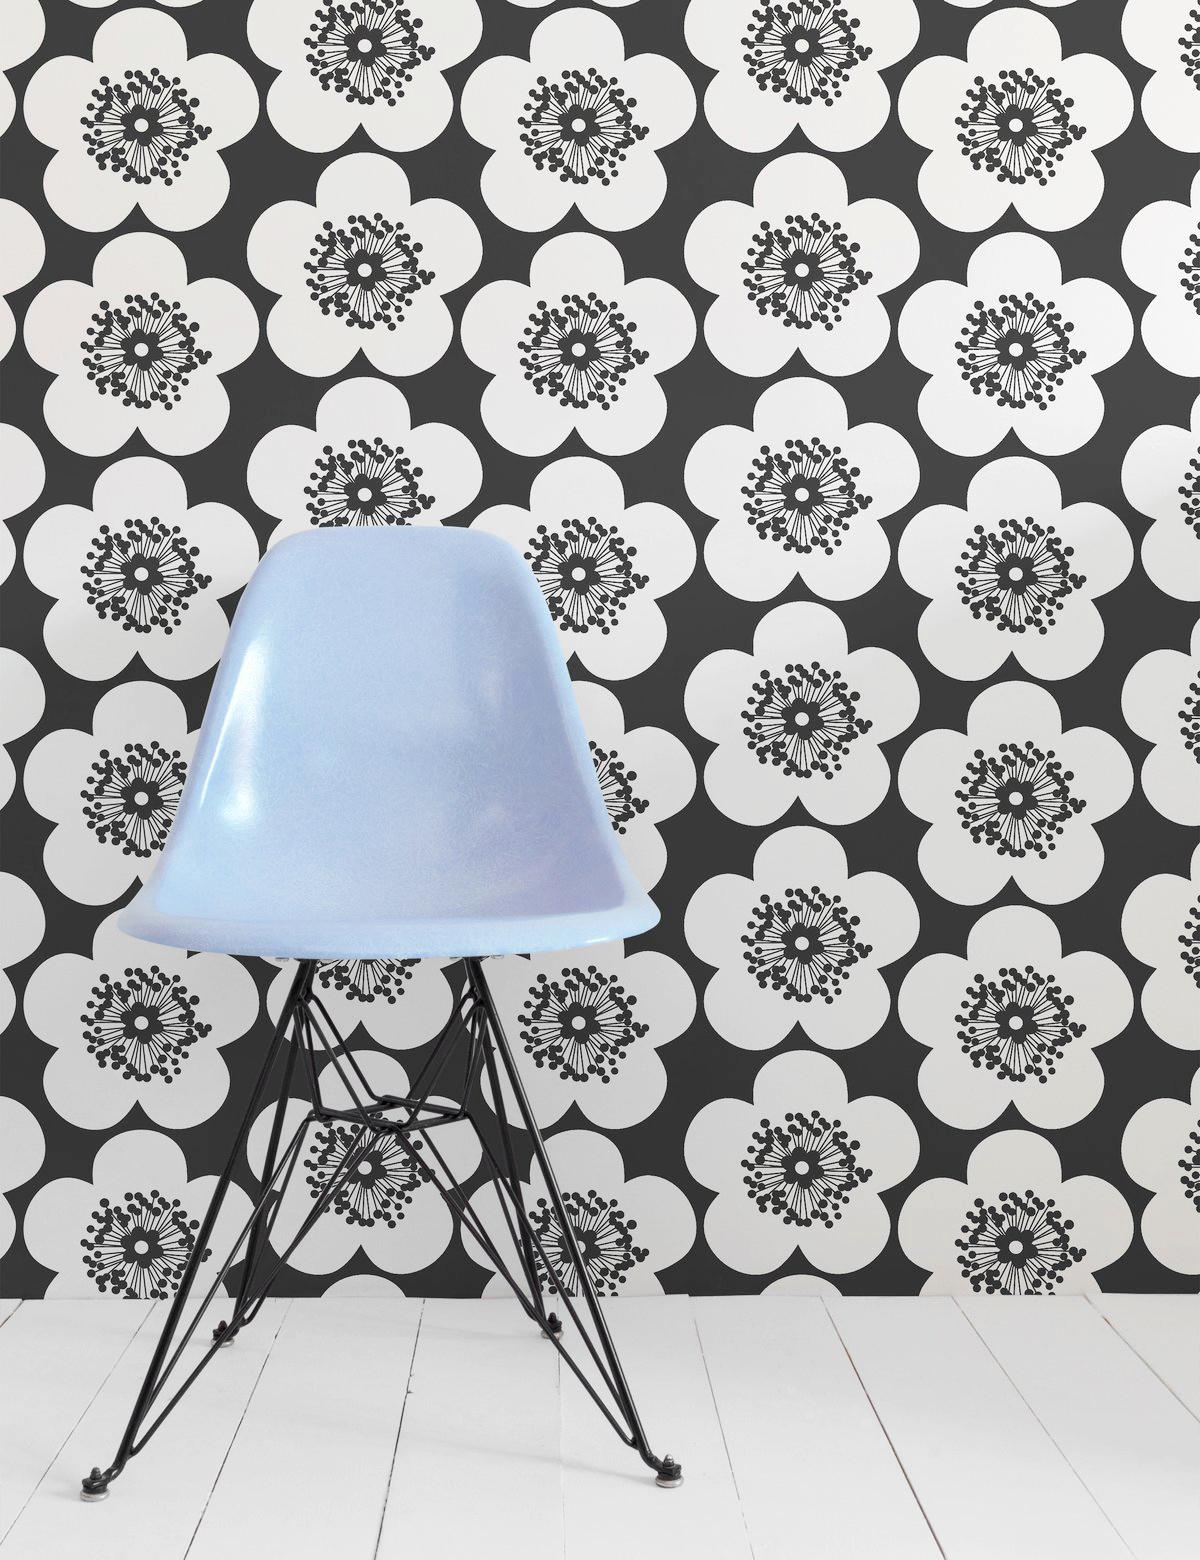 This wall-covering with oversized pop art flowers is the perfect wallpaper for your child's room!

Samples are available for $18 including US shipping, please message us to purchase.
 
Printing: Digital pigment print (minimum order of 4 rolls), or